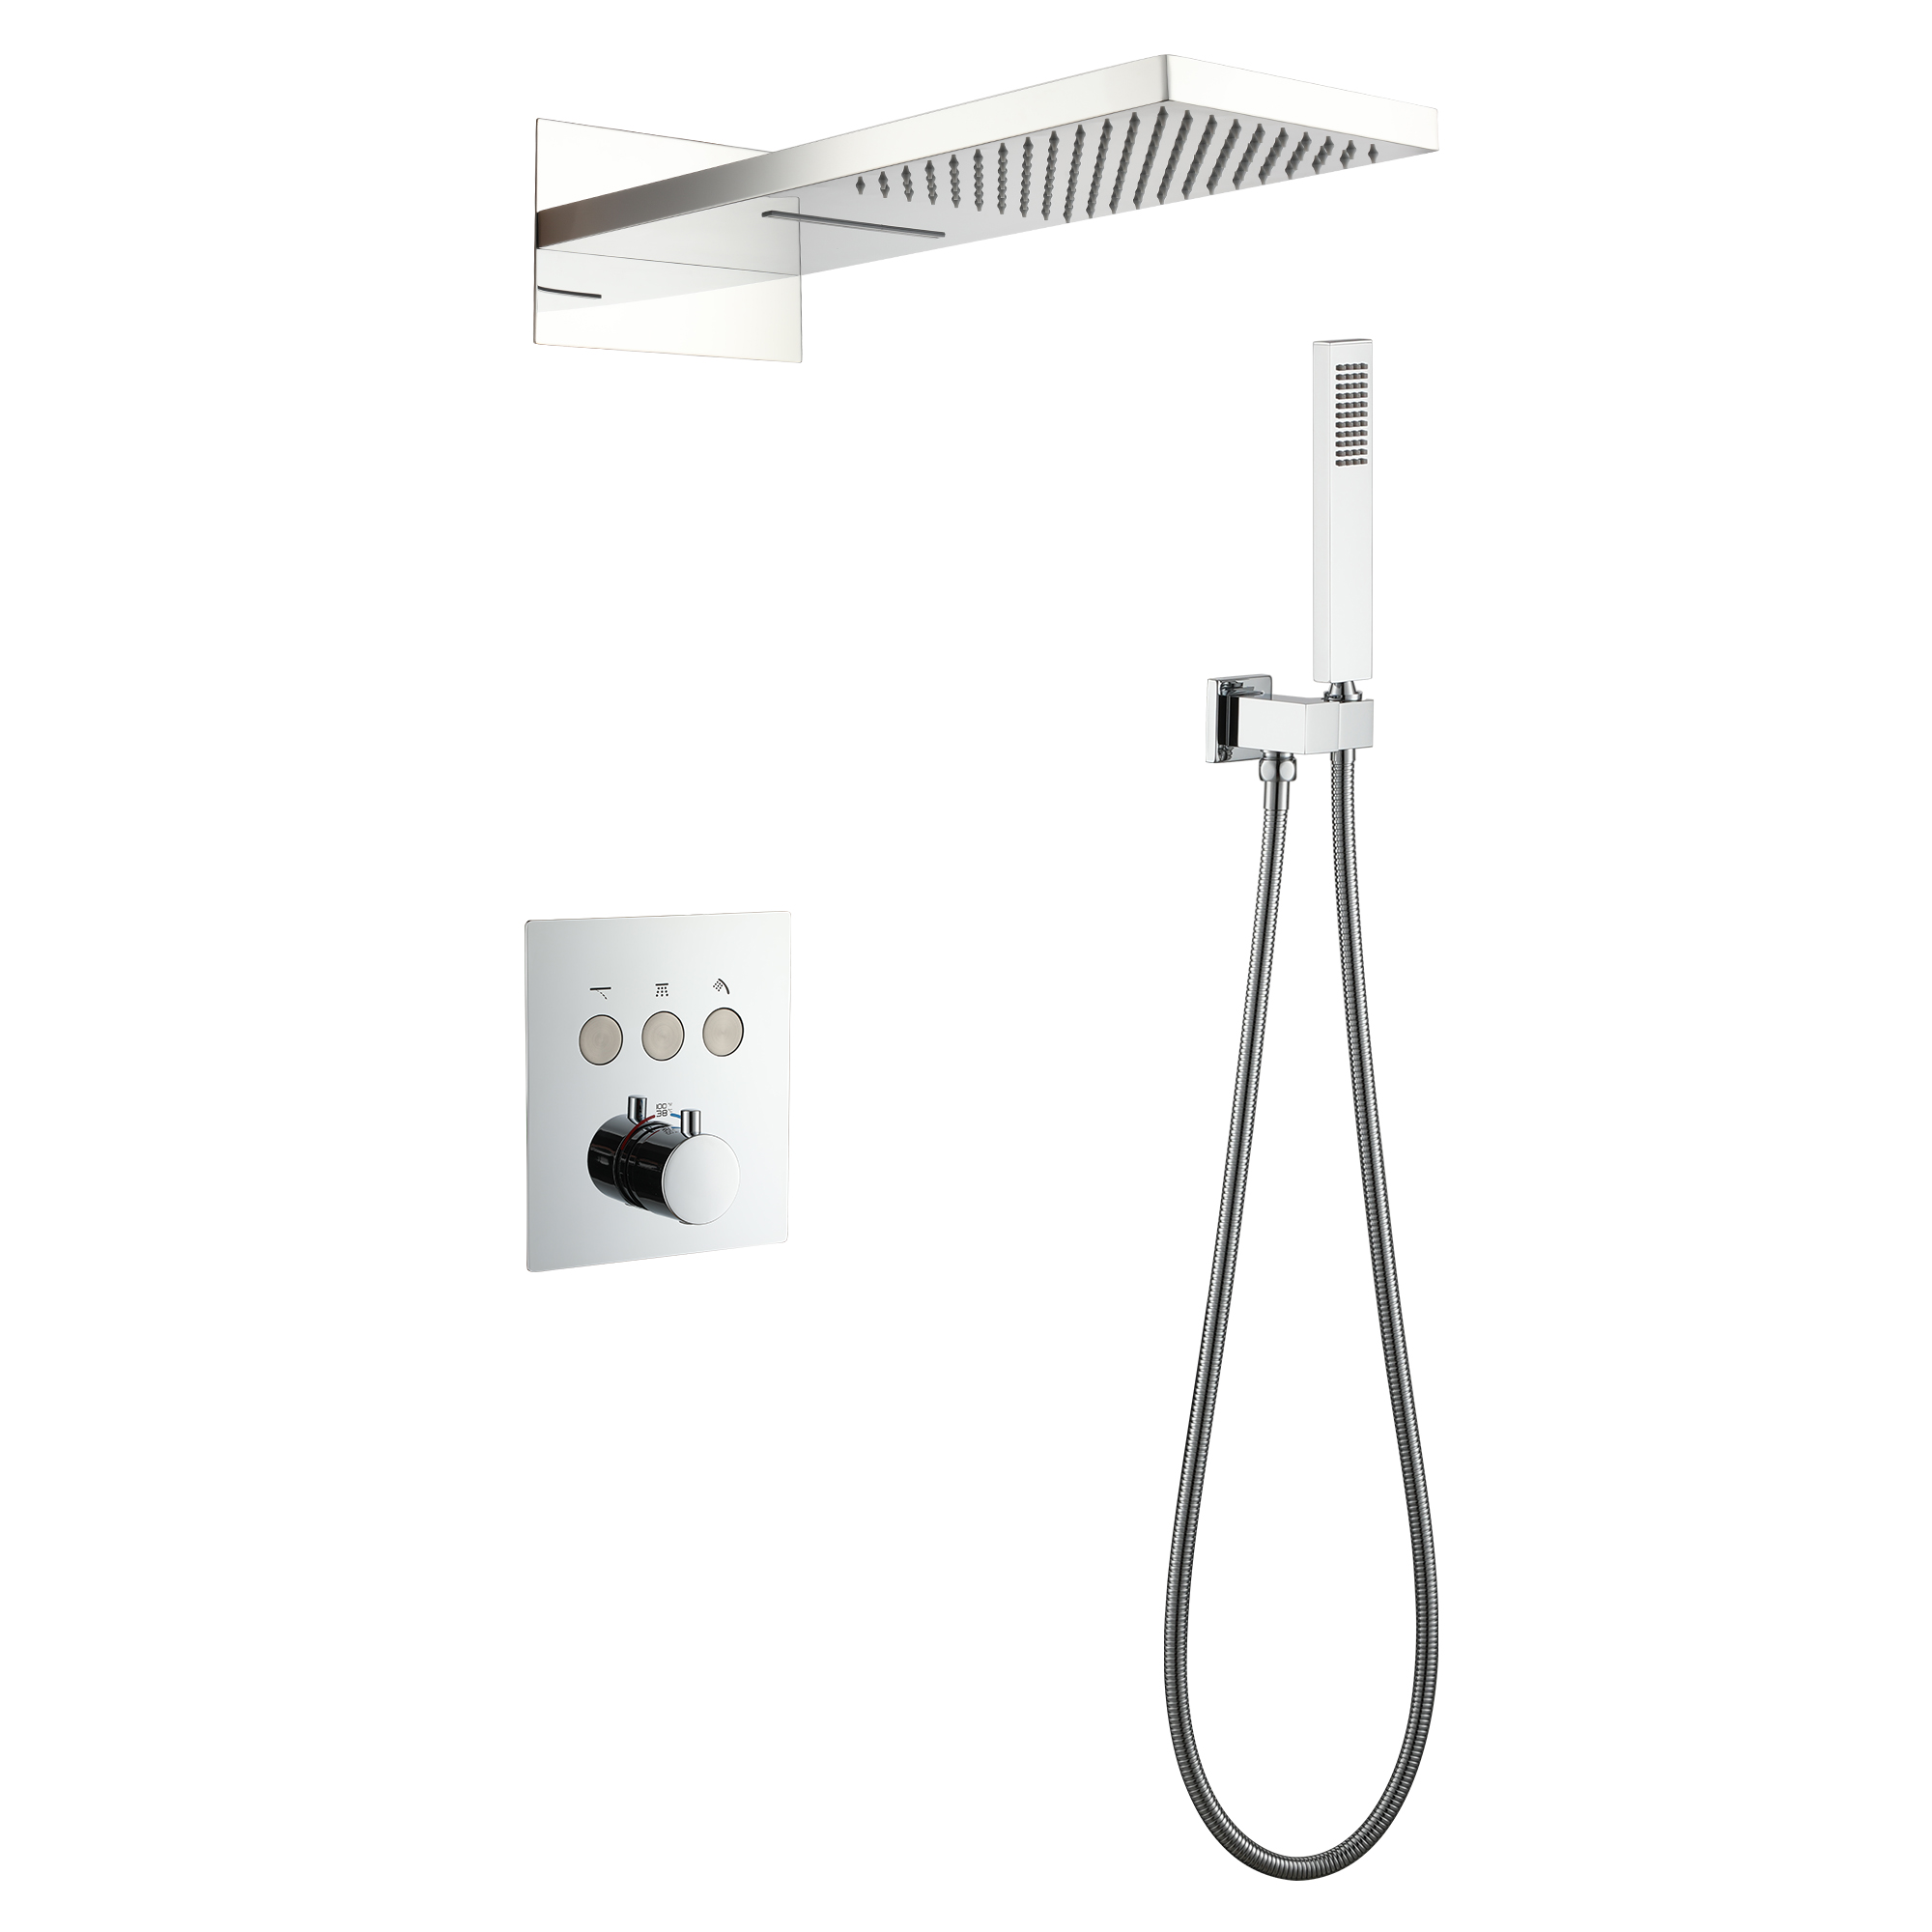 Wall-Mounted Rainfall & Waterfall Shower Head System with Handheld Shower, Modern Shower System with Hand Shower Elegance Overall Look